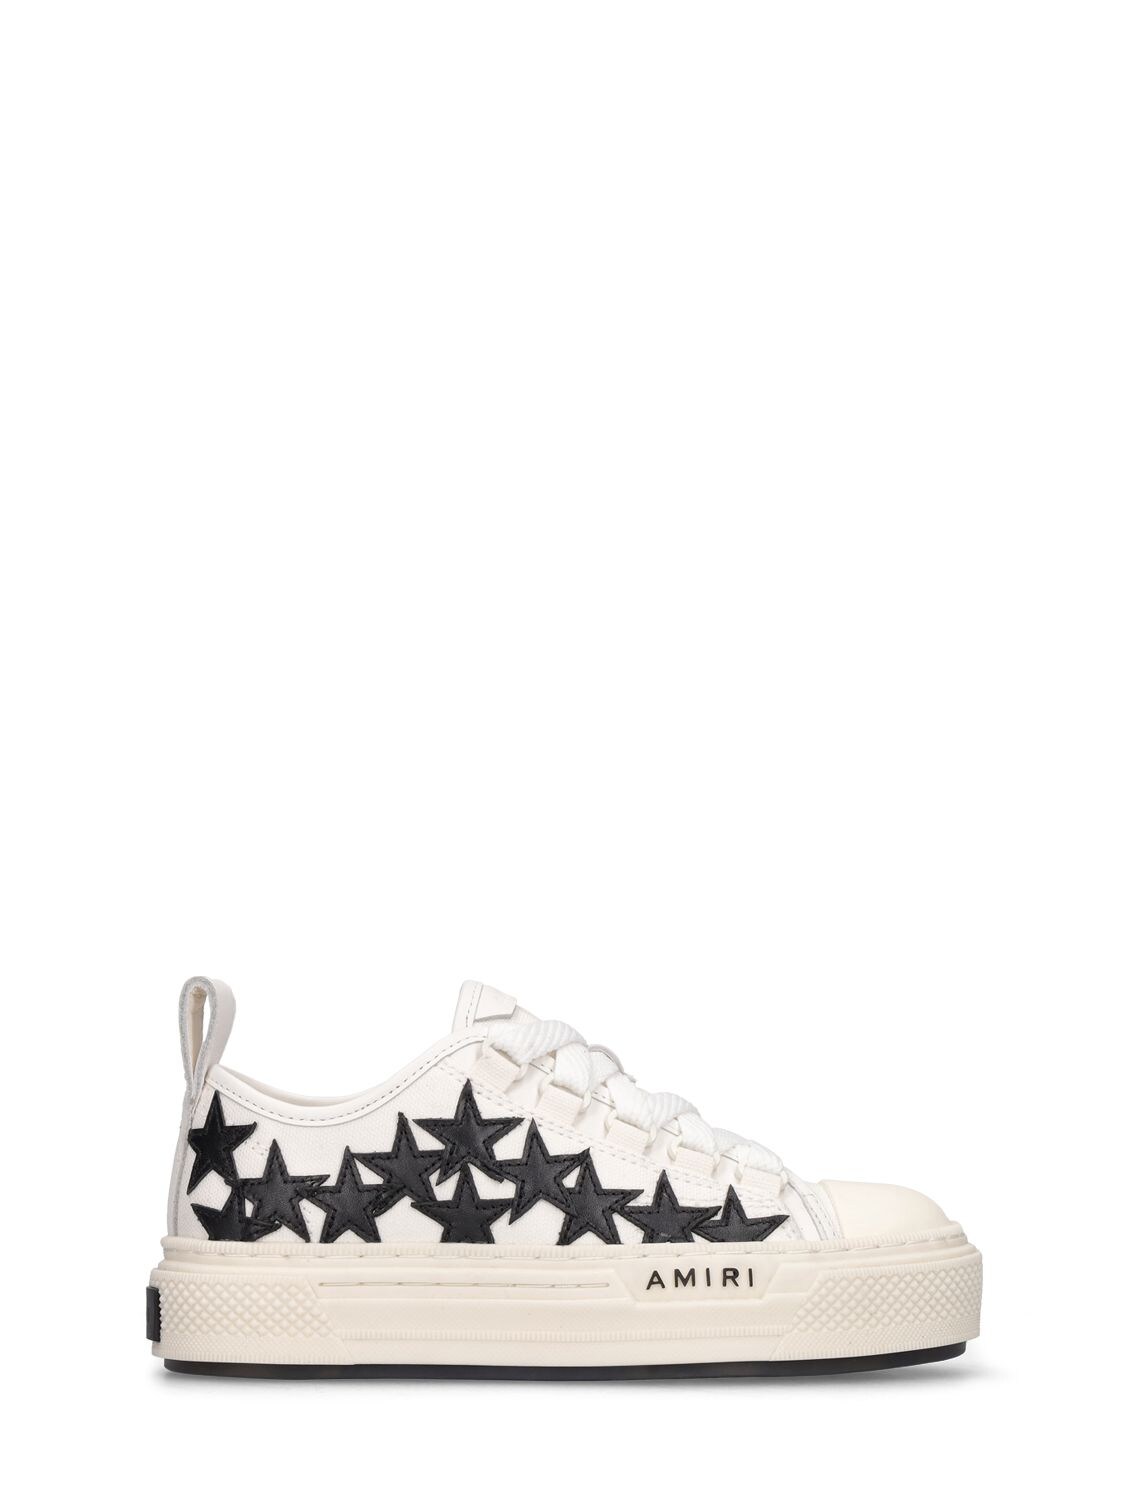 Amiri Kids' Printed Cotton Canvas Lace-up Sneakers In White,black